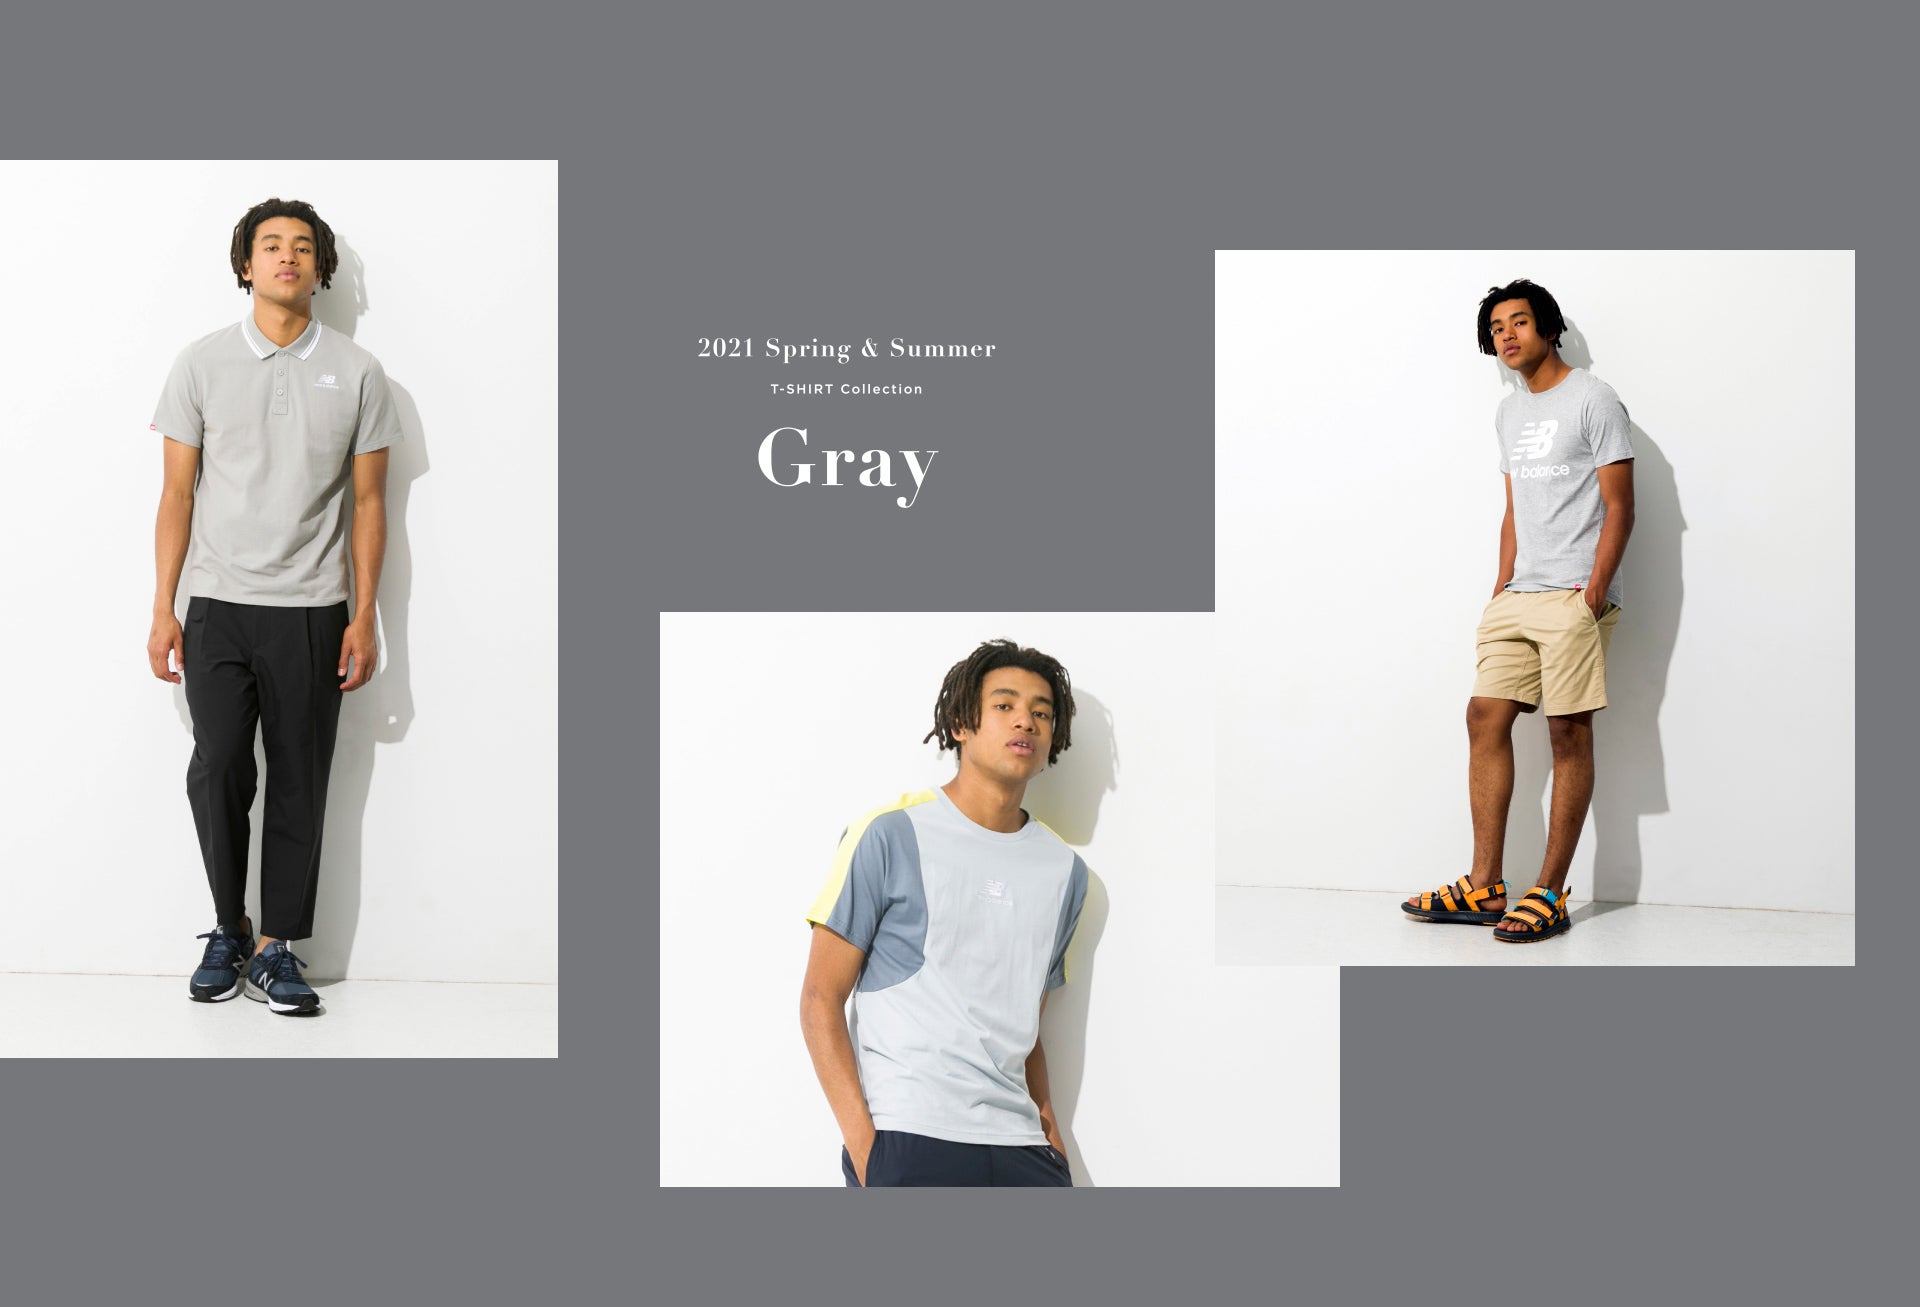 2021 Spring & Summer T-SHIRT Collection Gray